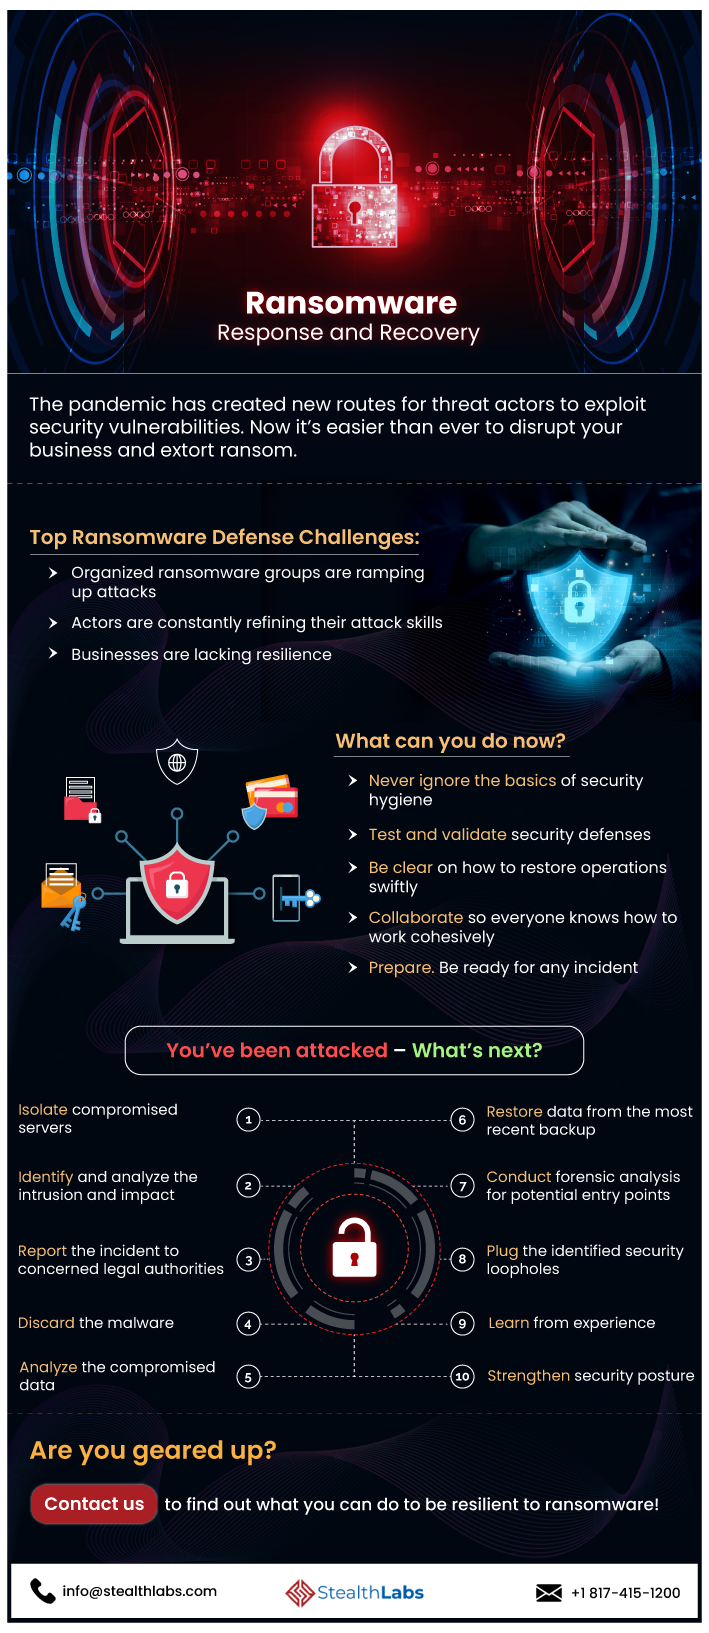 Ransomware Response and Recovery Plan Infographic